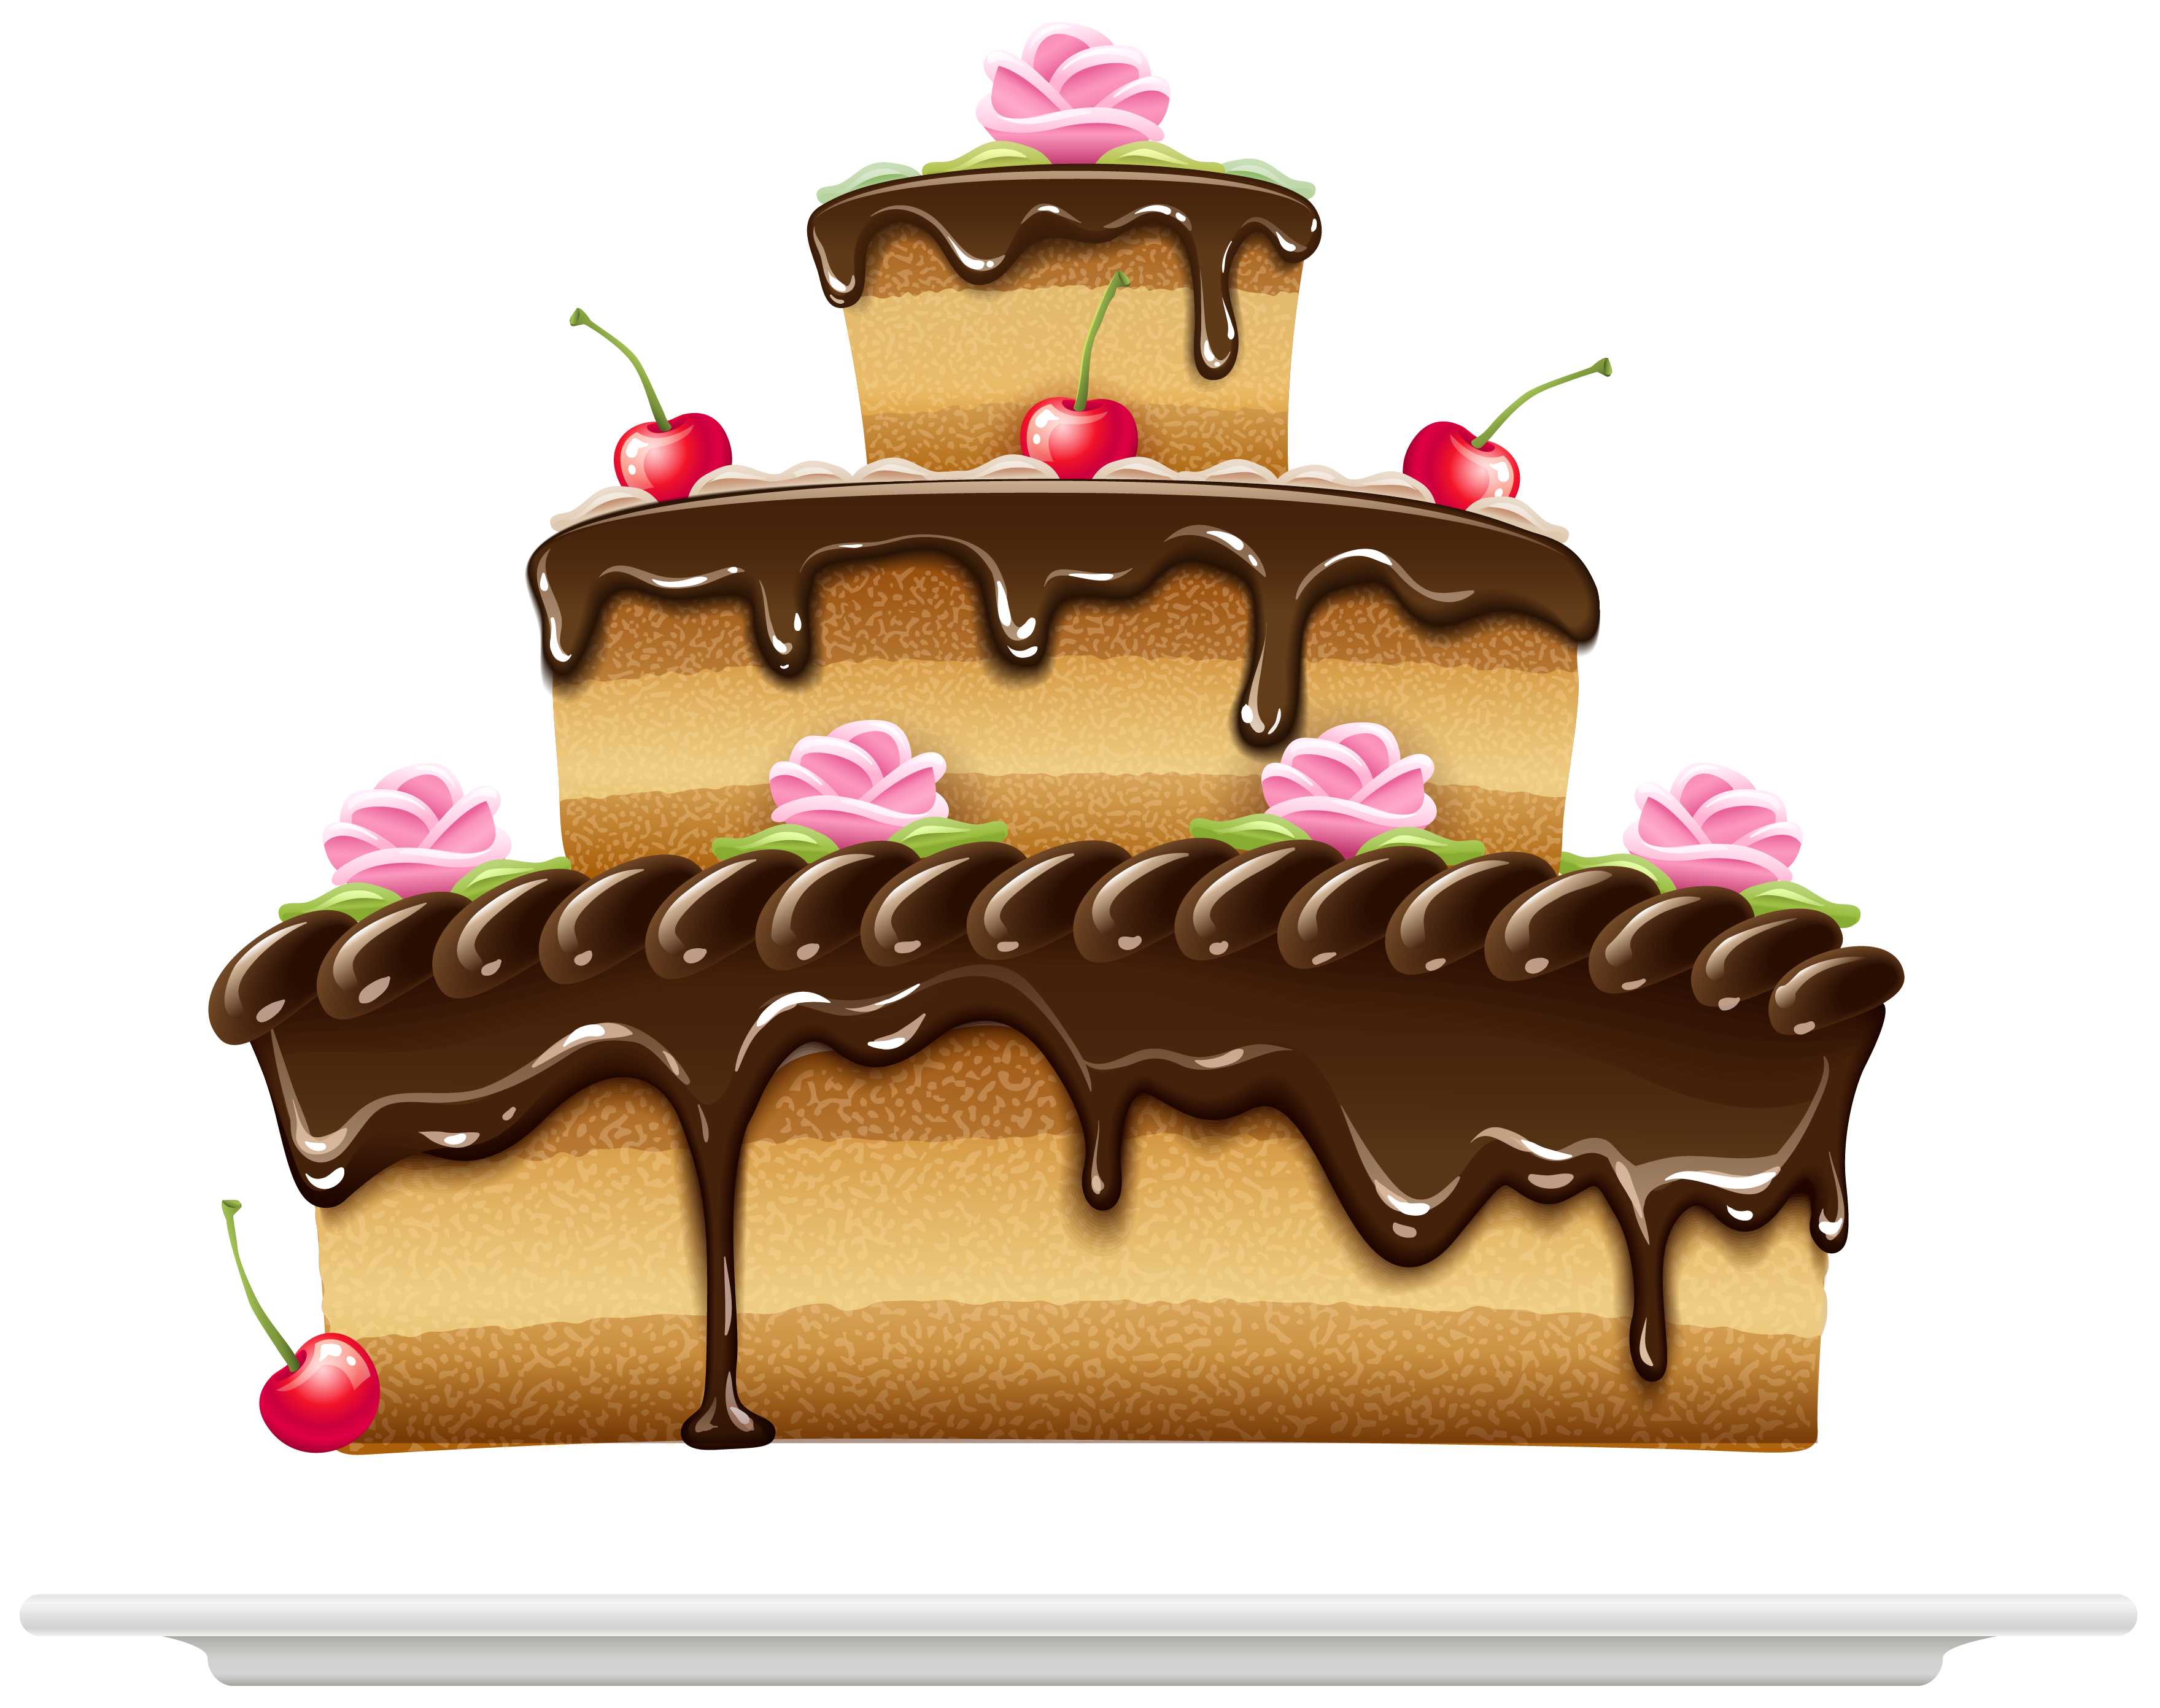 Free: Birthday cake Black Forest gateau Chocolate cake, chocolate cake  transparent background PNG clipart - nohat.cc